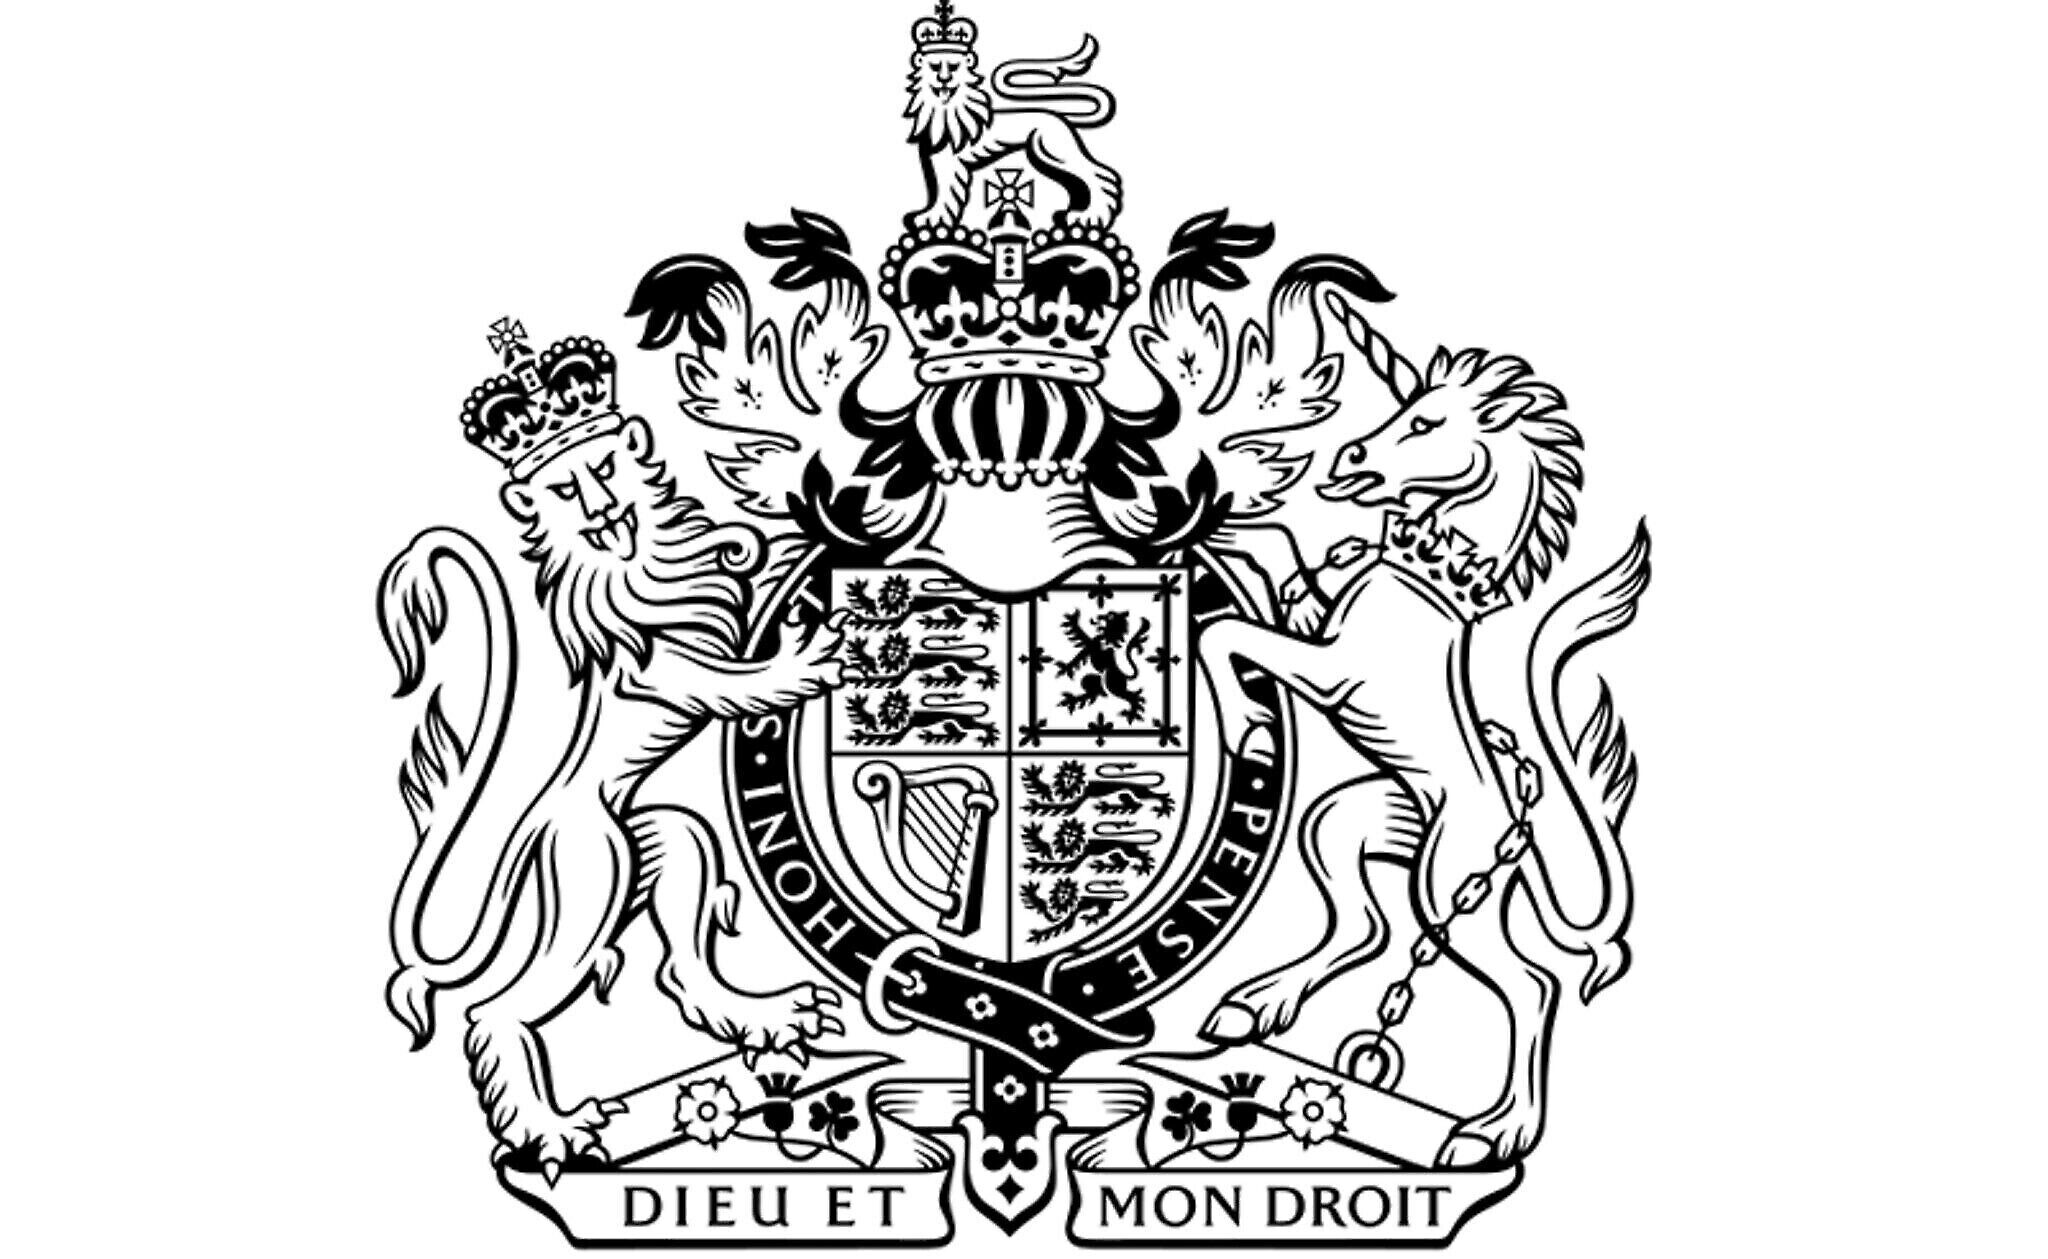 What is a royal warrant and which famous companies hold one?